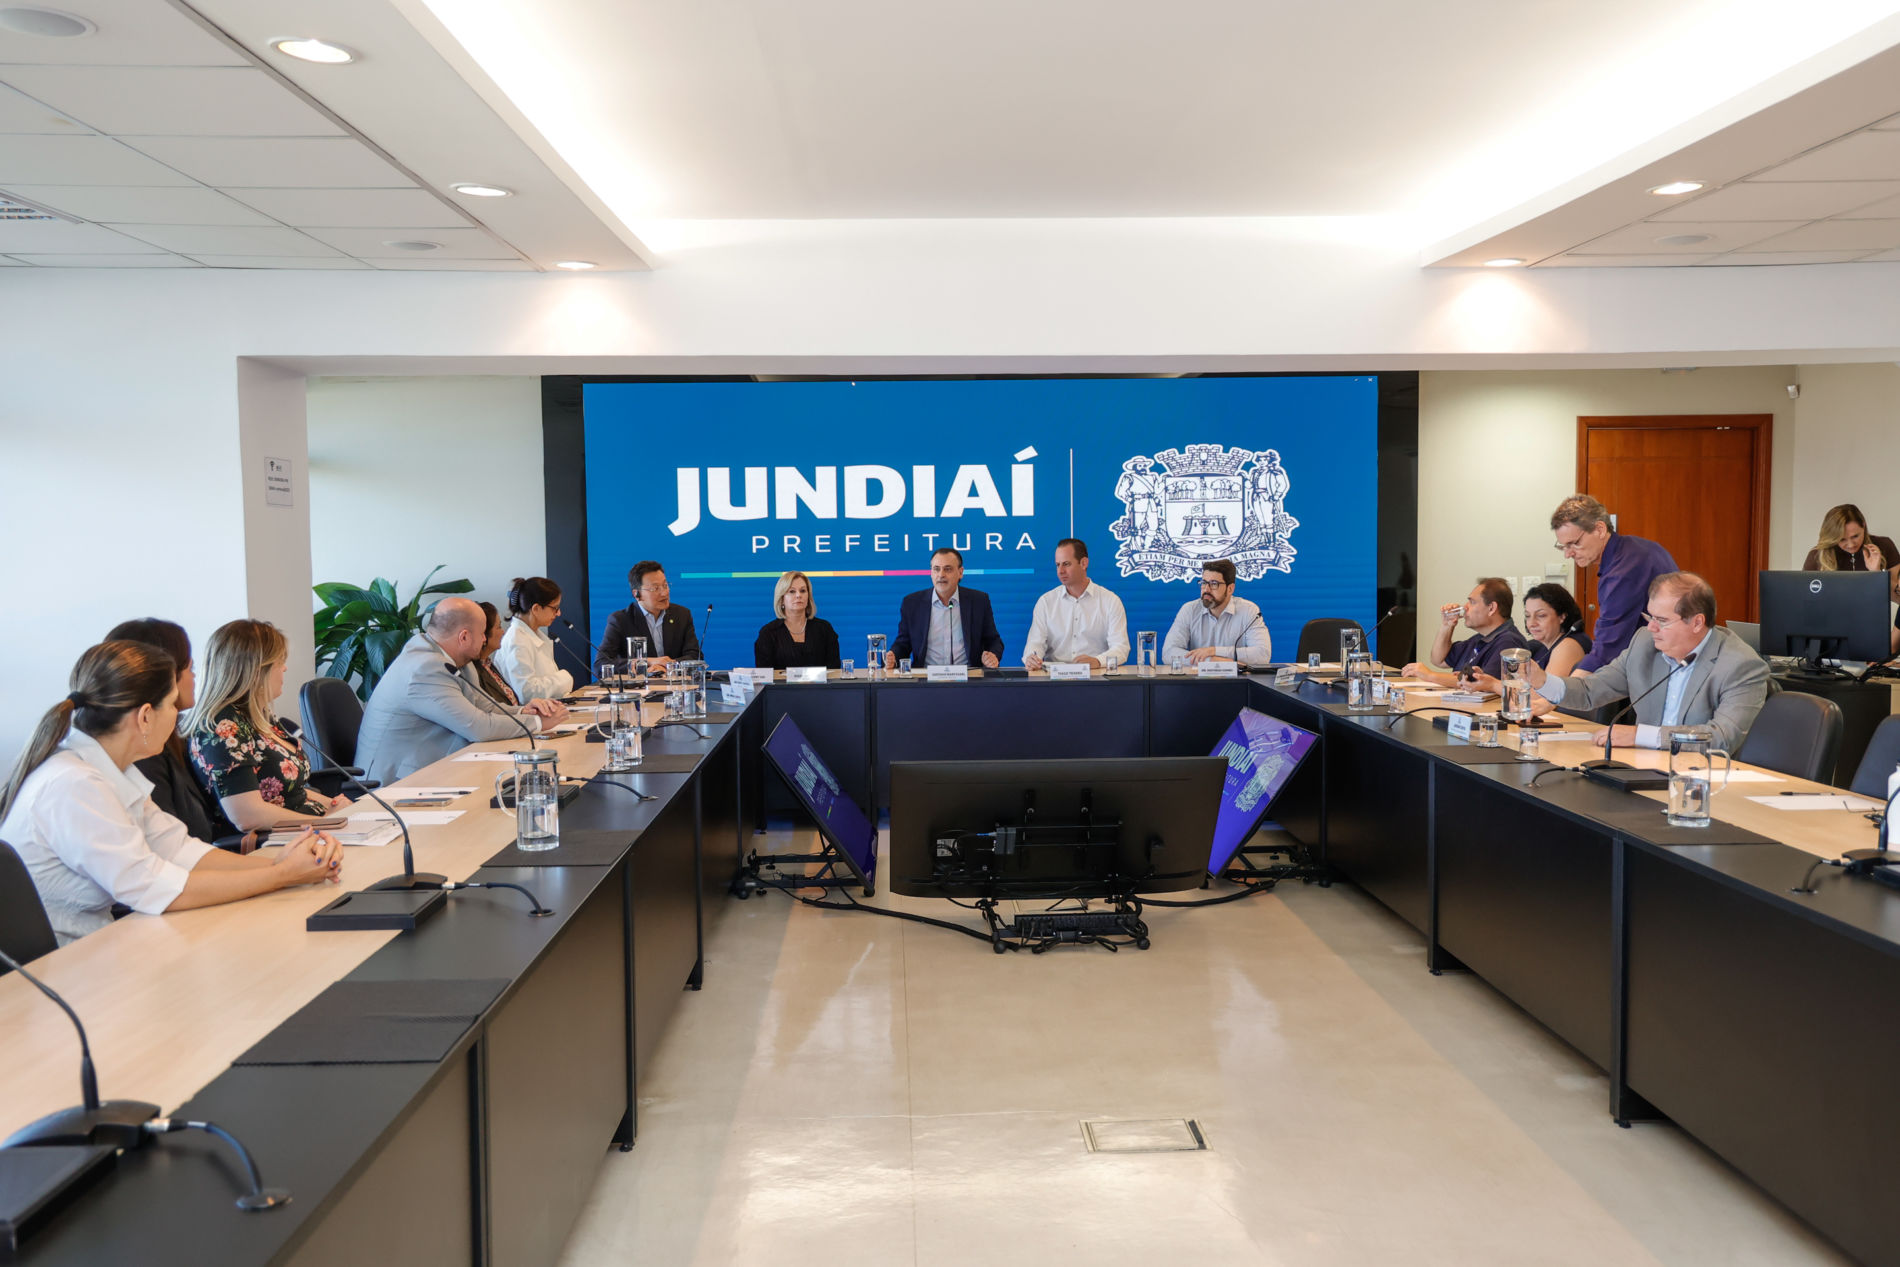 Jundia receives a visit from representatives of the UK’s premier healthcare organization